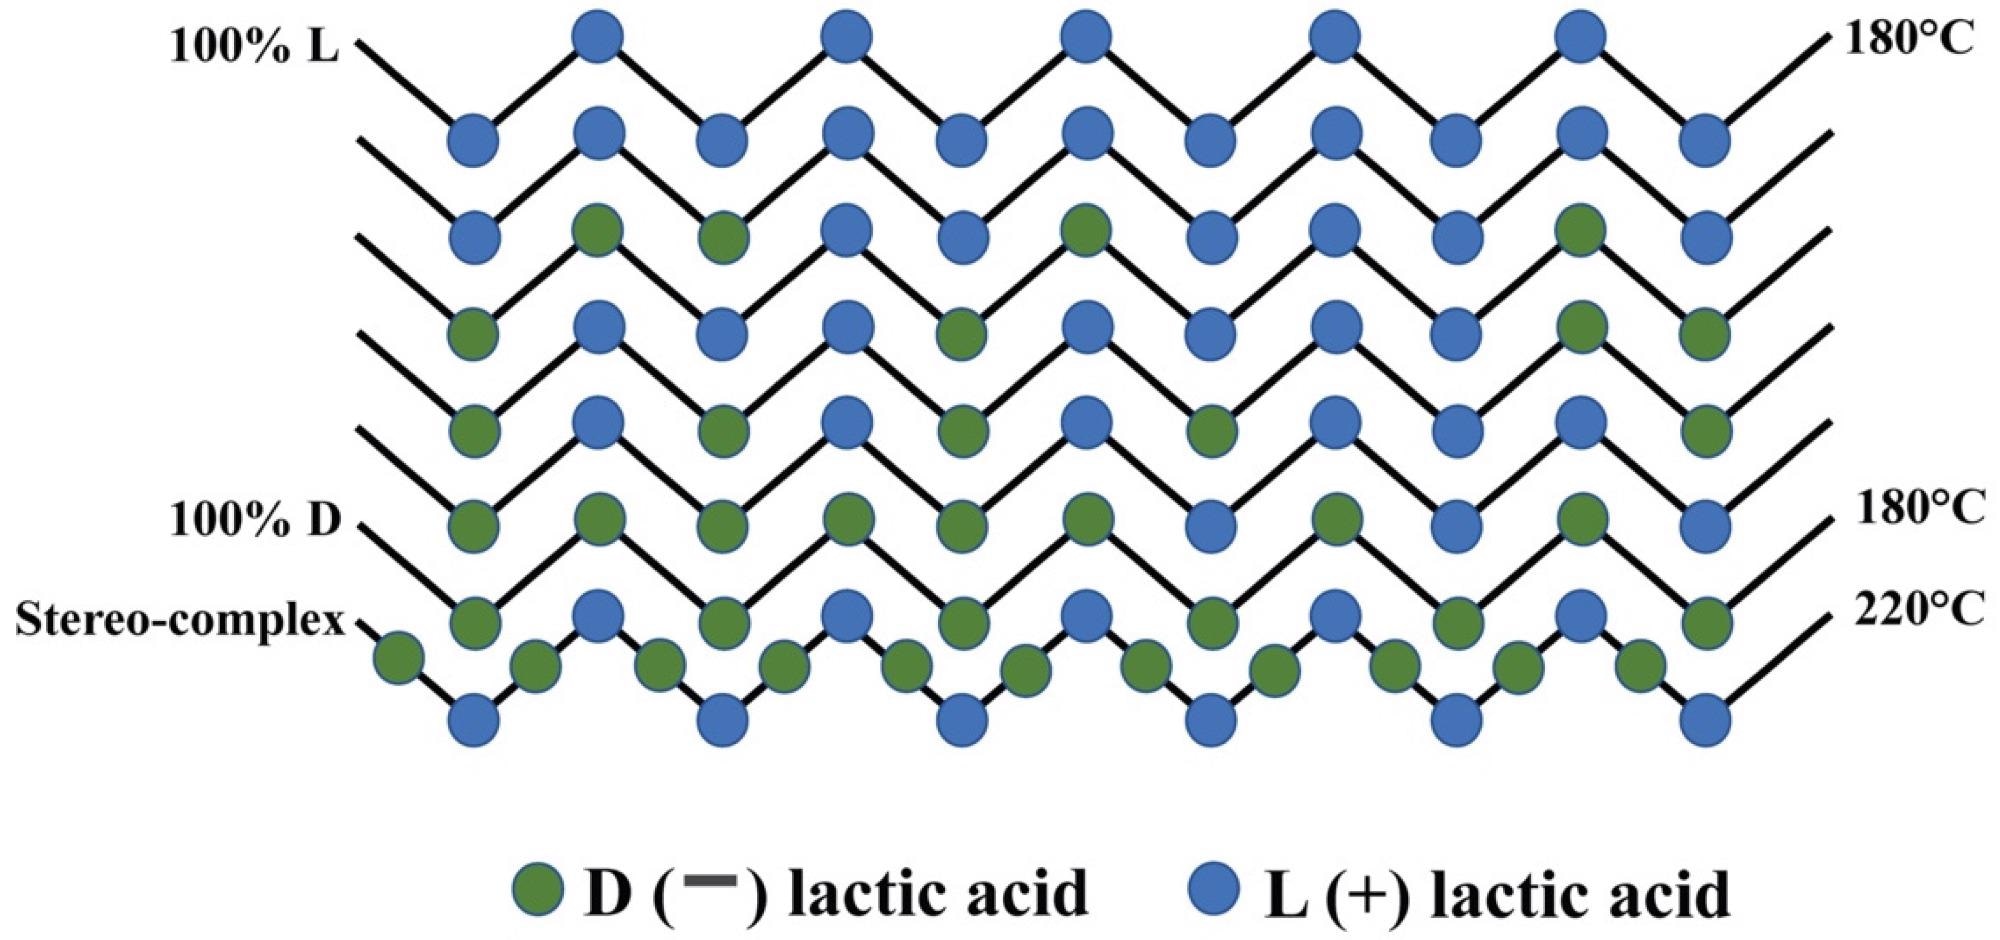 Examples of molecular configurations of PLA obtained by combining the two lactic acids.